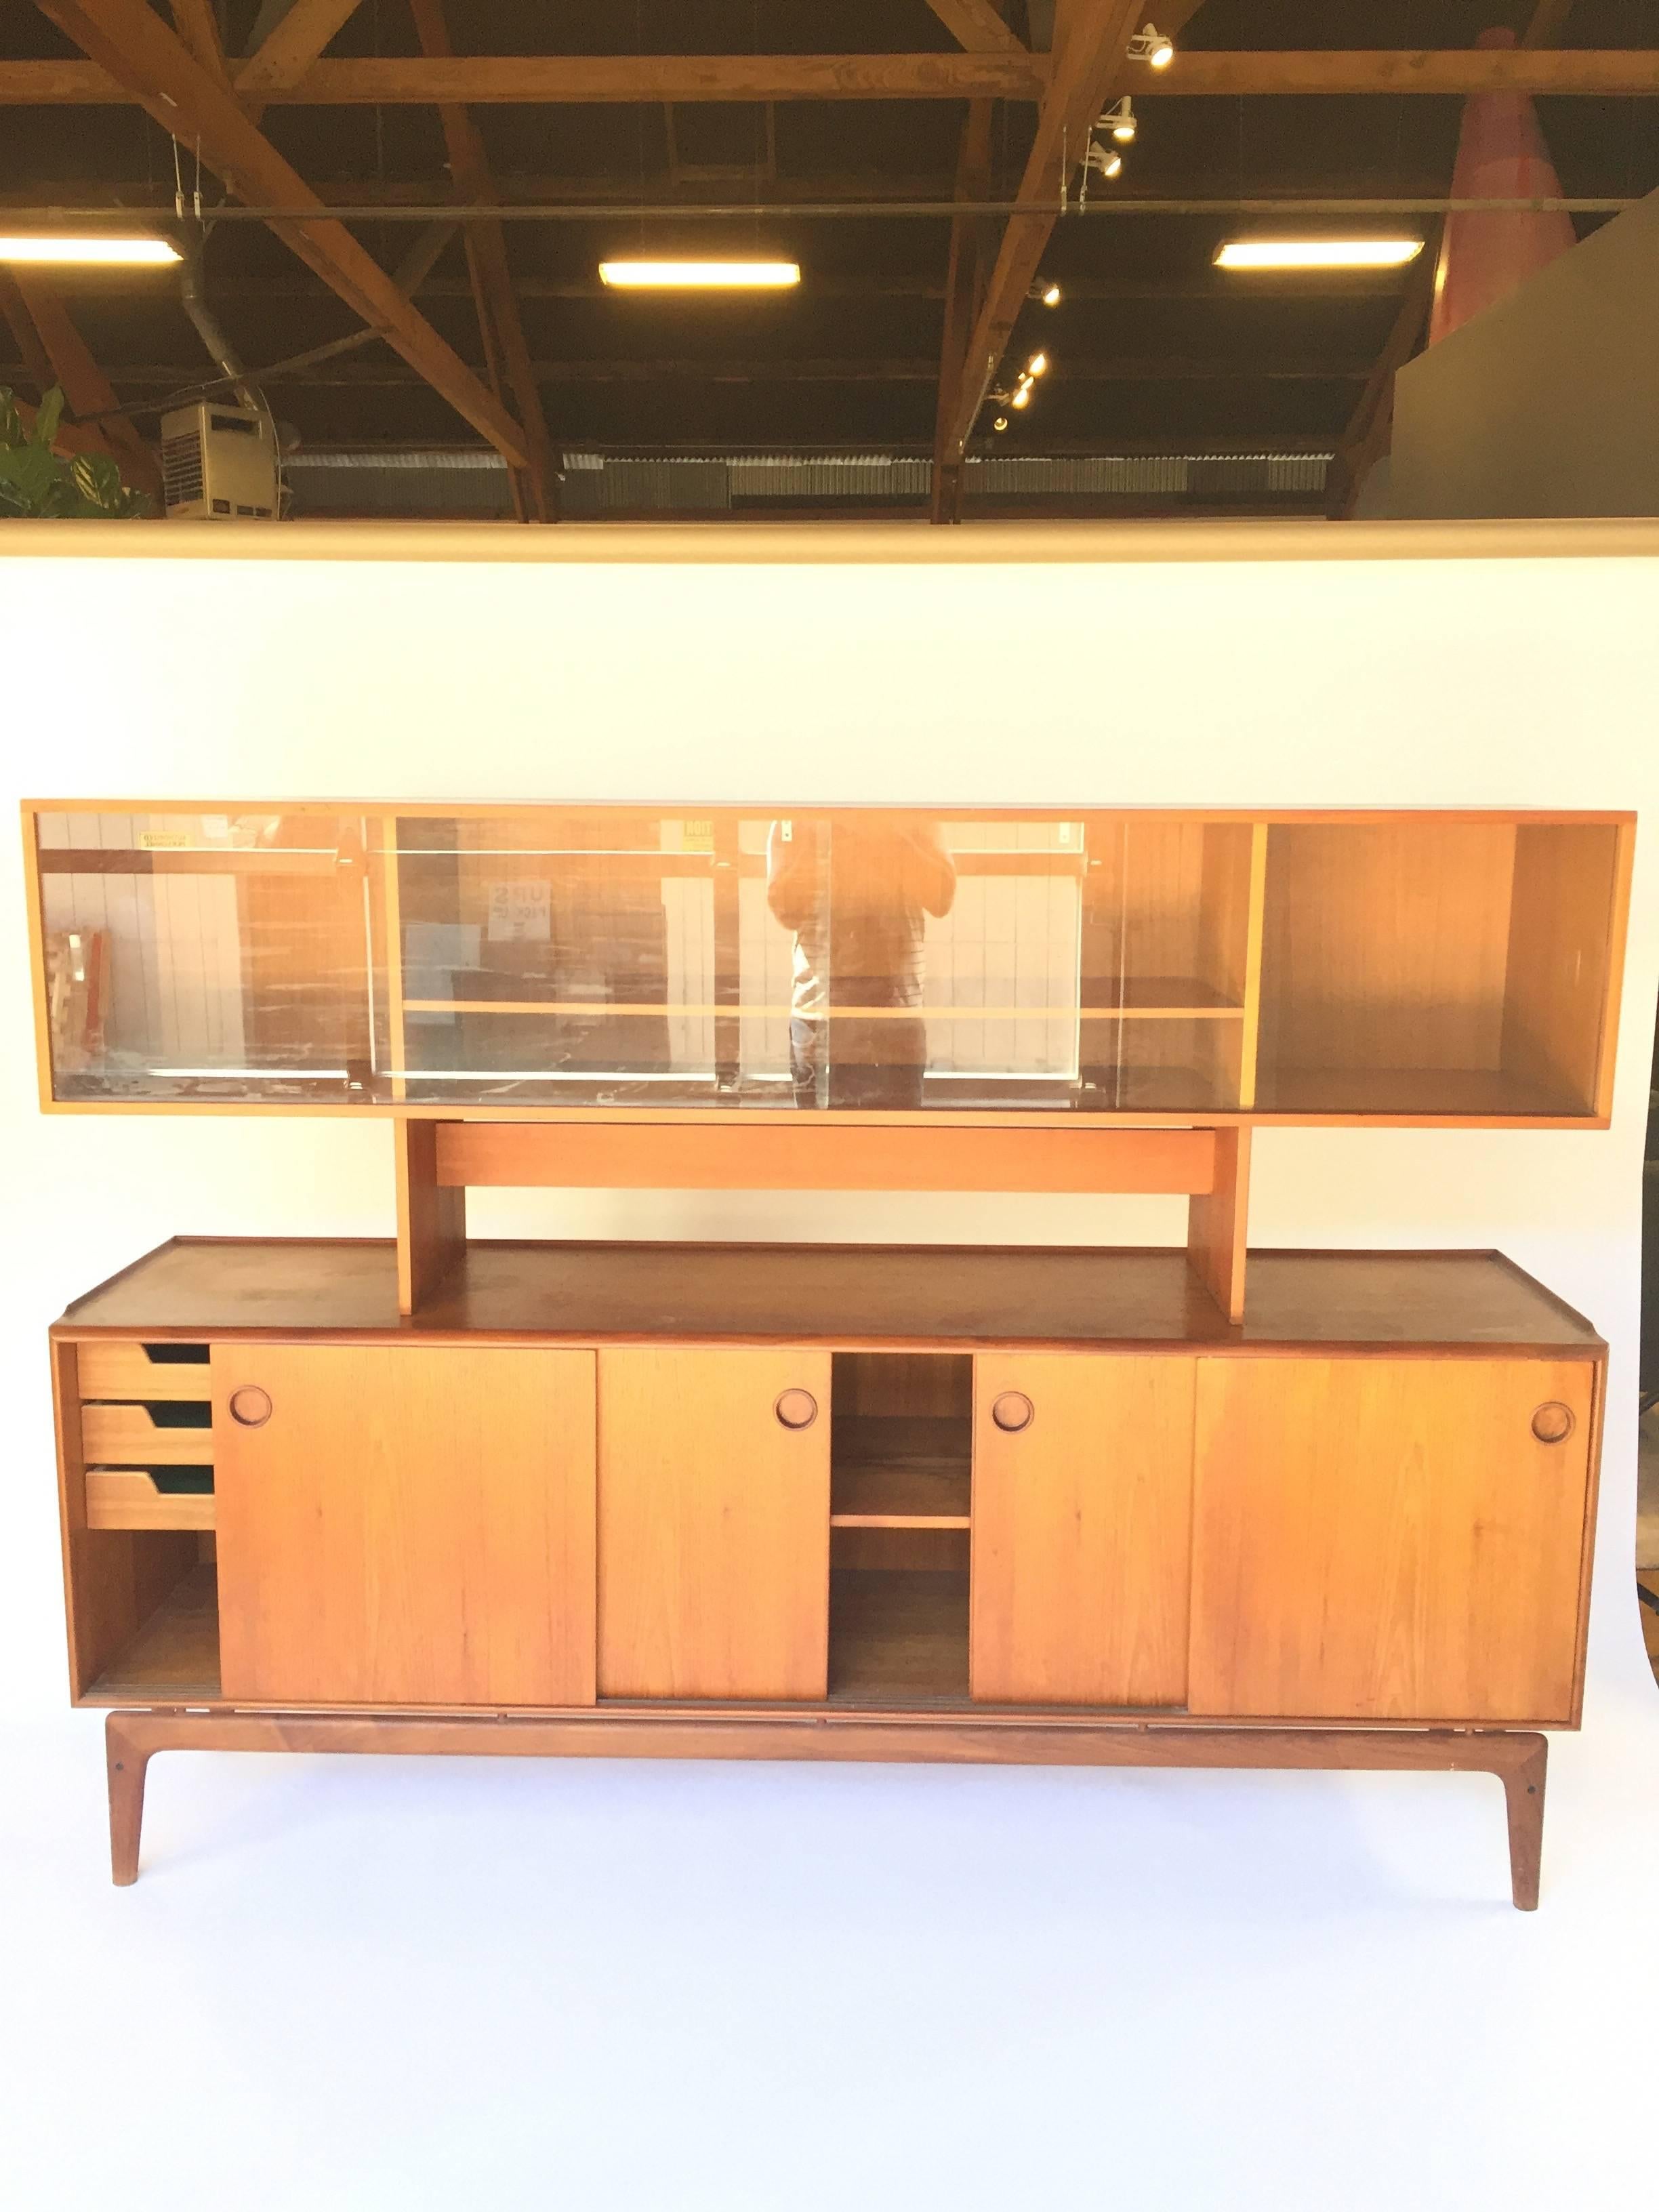 Stunning teak credenza designed by Jens Quistgaard and made in Denmark for Peter Løvig Nielsen. The top storage section of the credenza is removable and has sliding glass doors. Center and right sections of the credenza have an adjustable shelf,